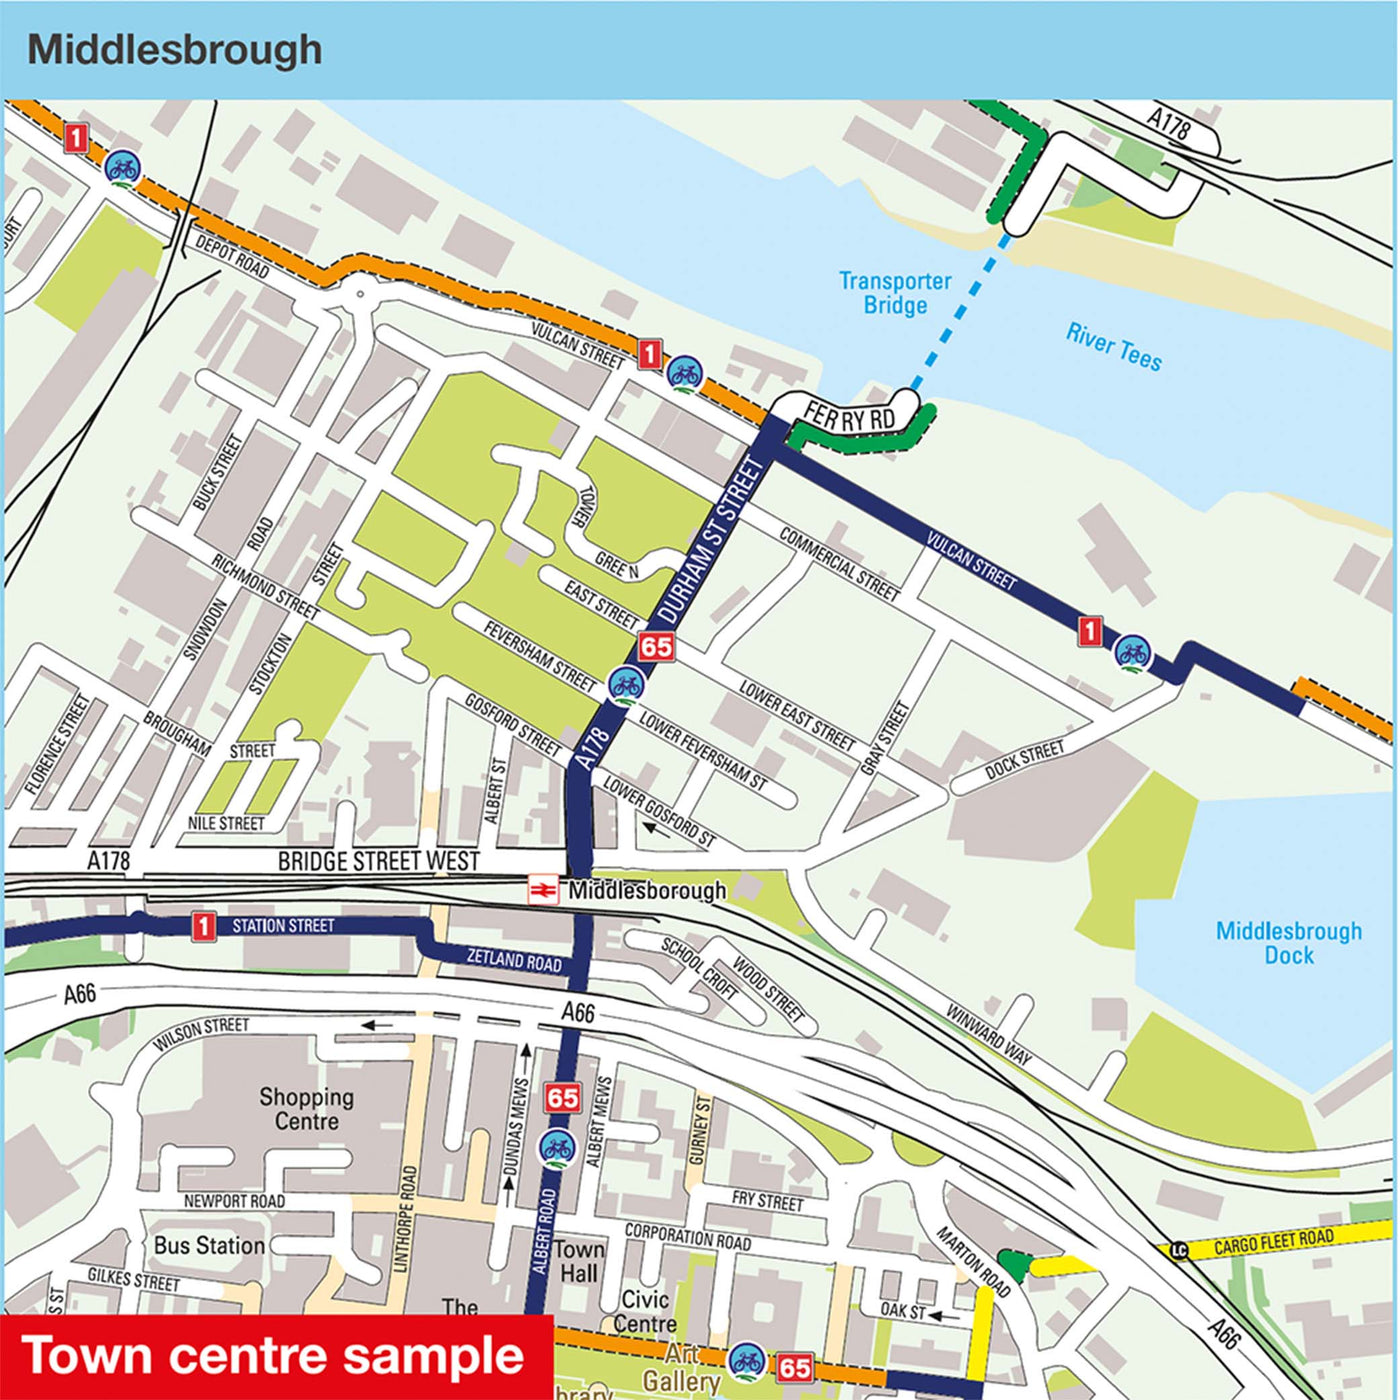 Town centre sample: Middlesbrough, featuring routes 1 and 65